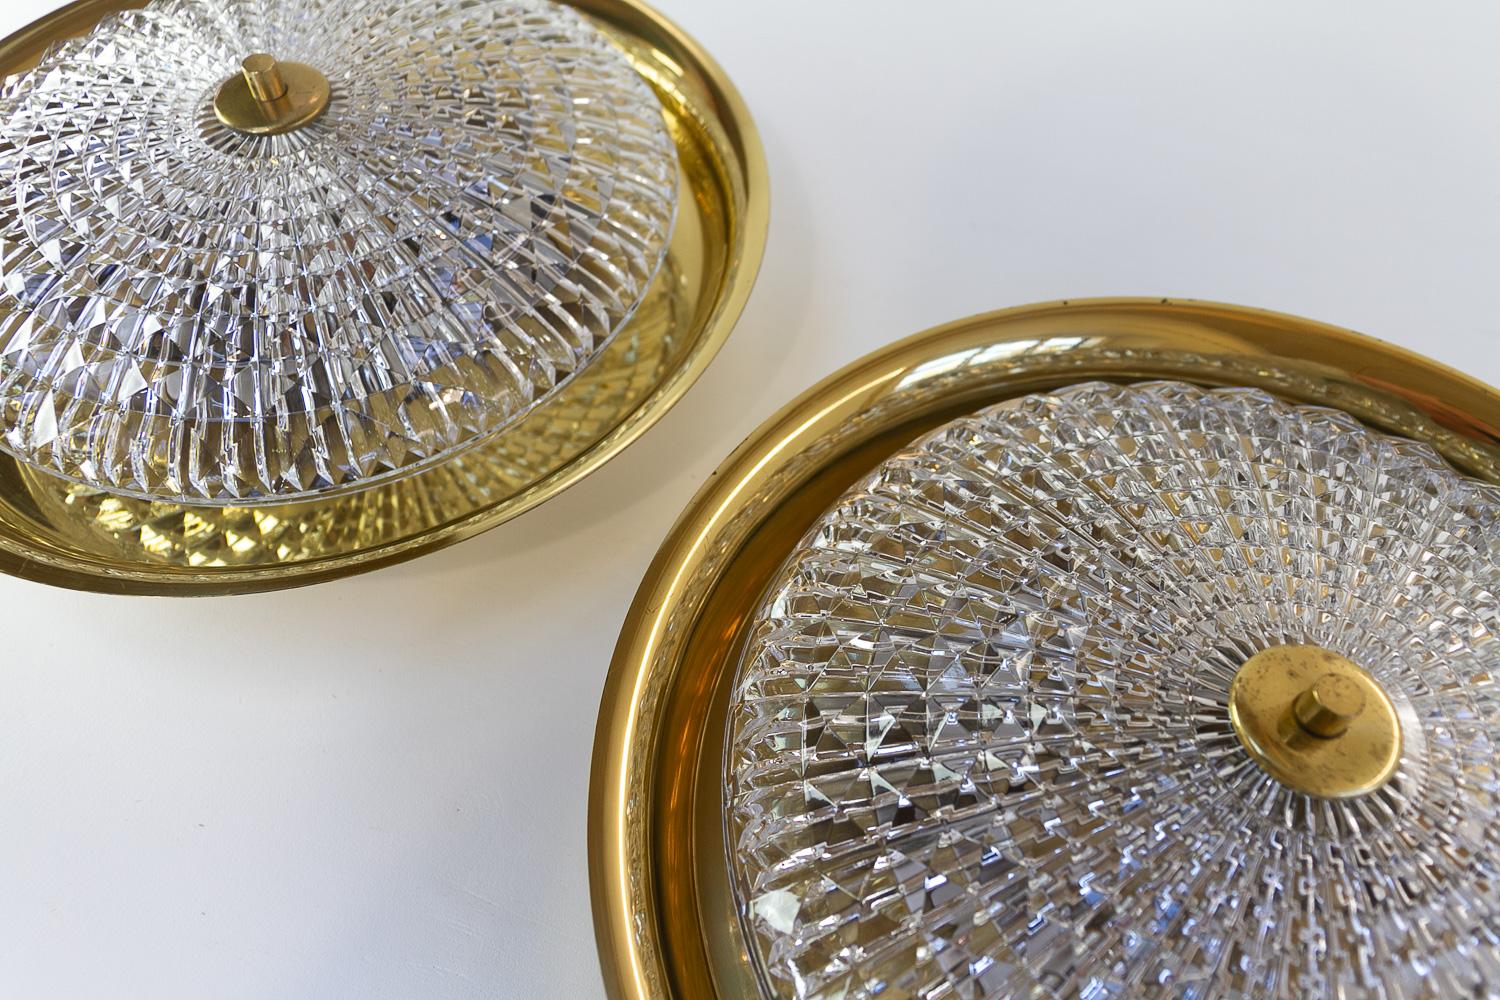 Crystal Orrefors Brass Wall or Ceiling Lamps by Fagerlund for Lyfa, 1960s. Set of 2. For Sale